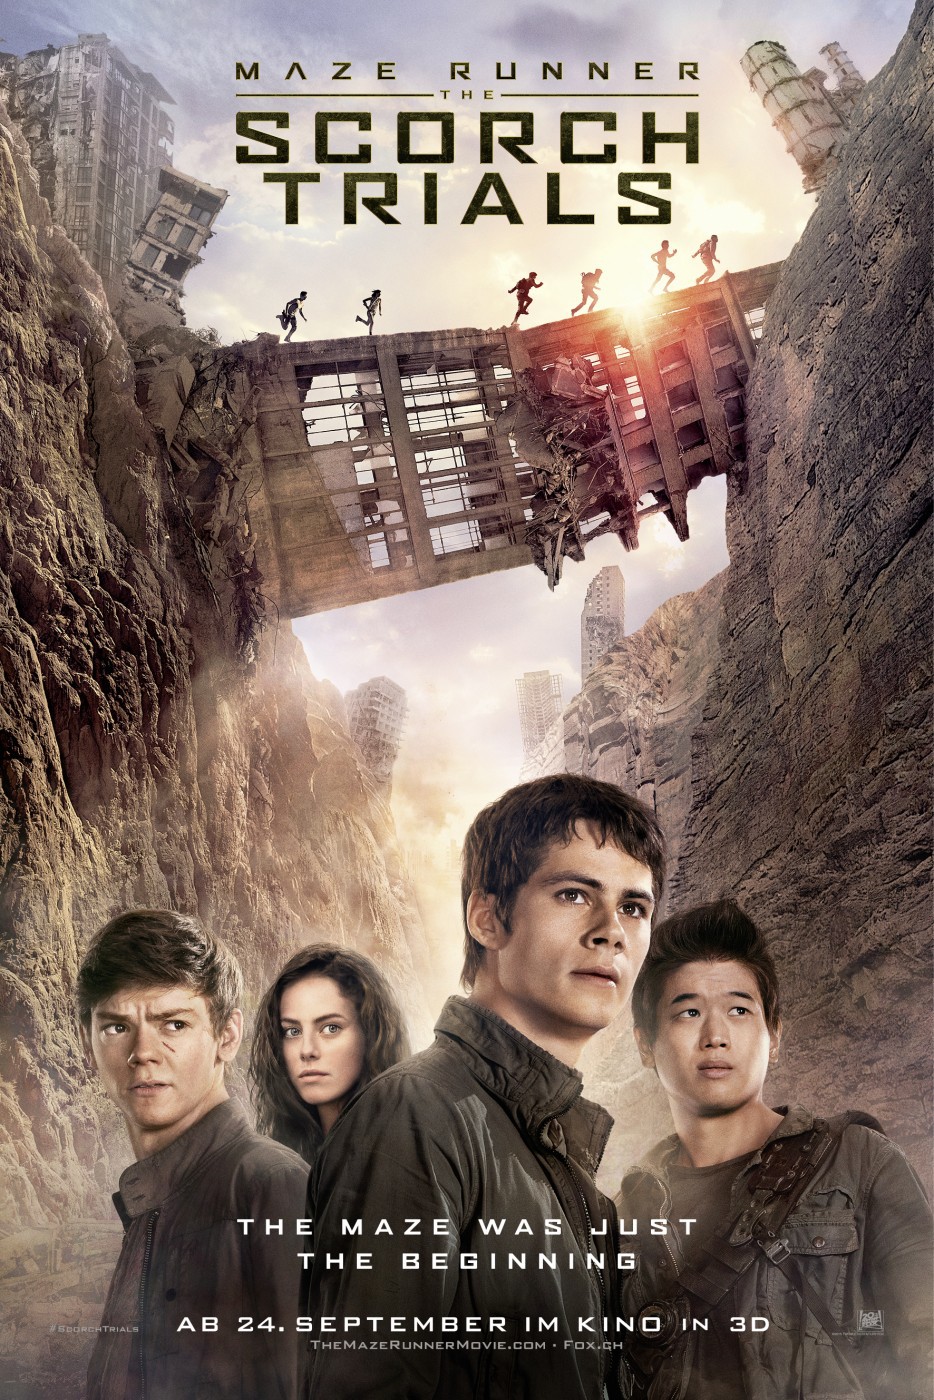 Maze Runner 2: The Scorch Trials (2015) 720p Hindi Dubbed HDRip x264 AAC +ESubs by Full4movies